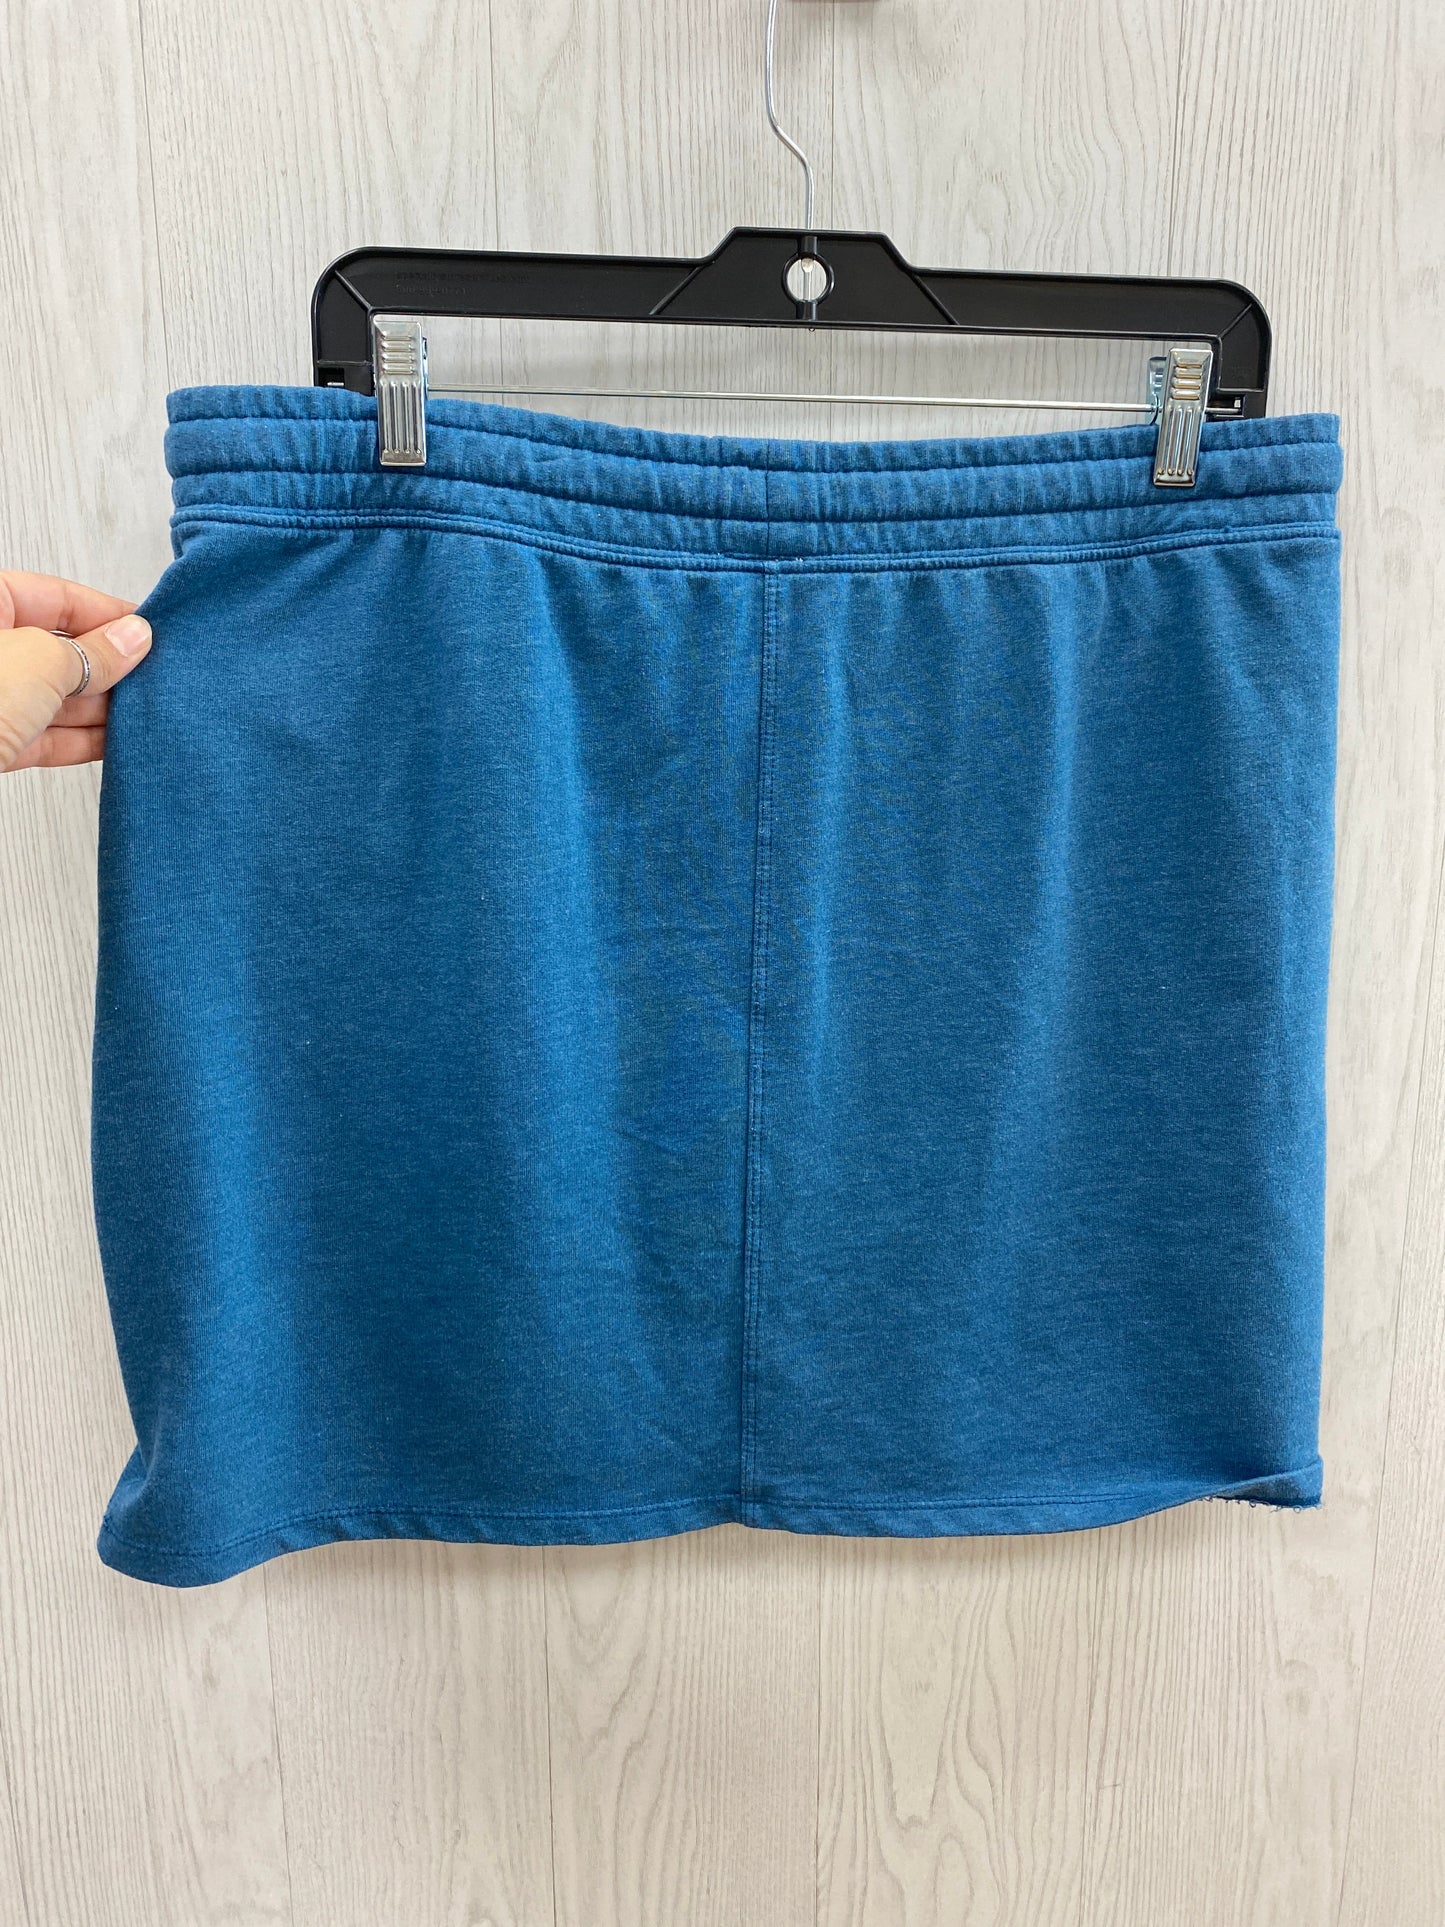 Blue Athletic Shorts Members Mark, Size L